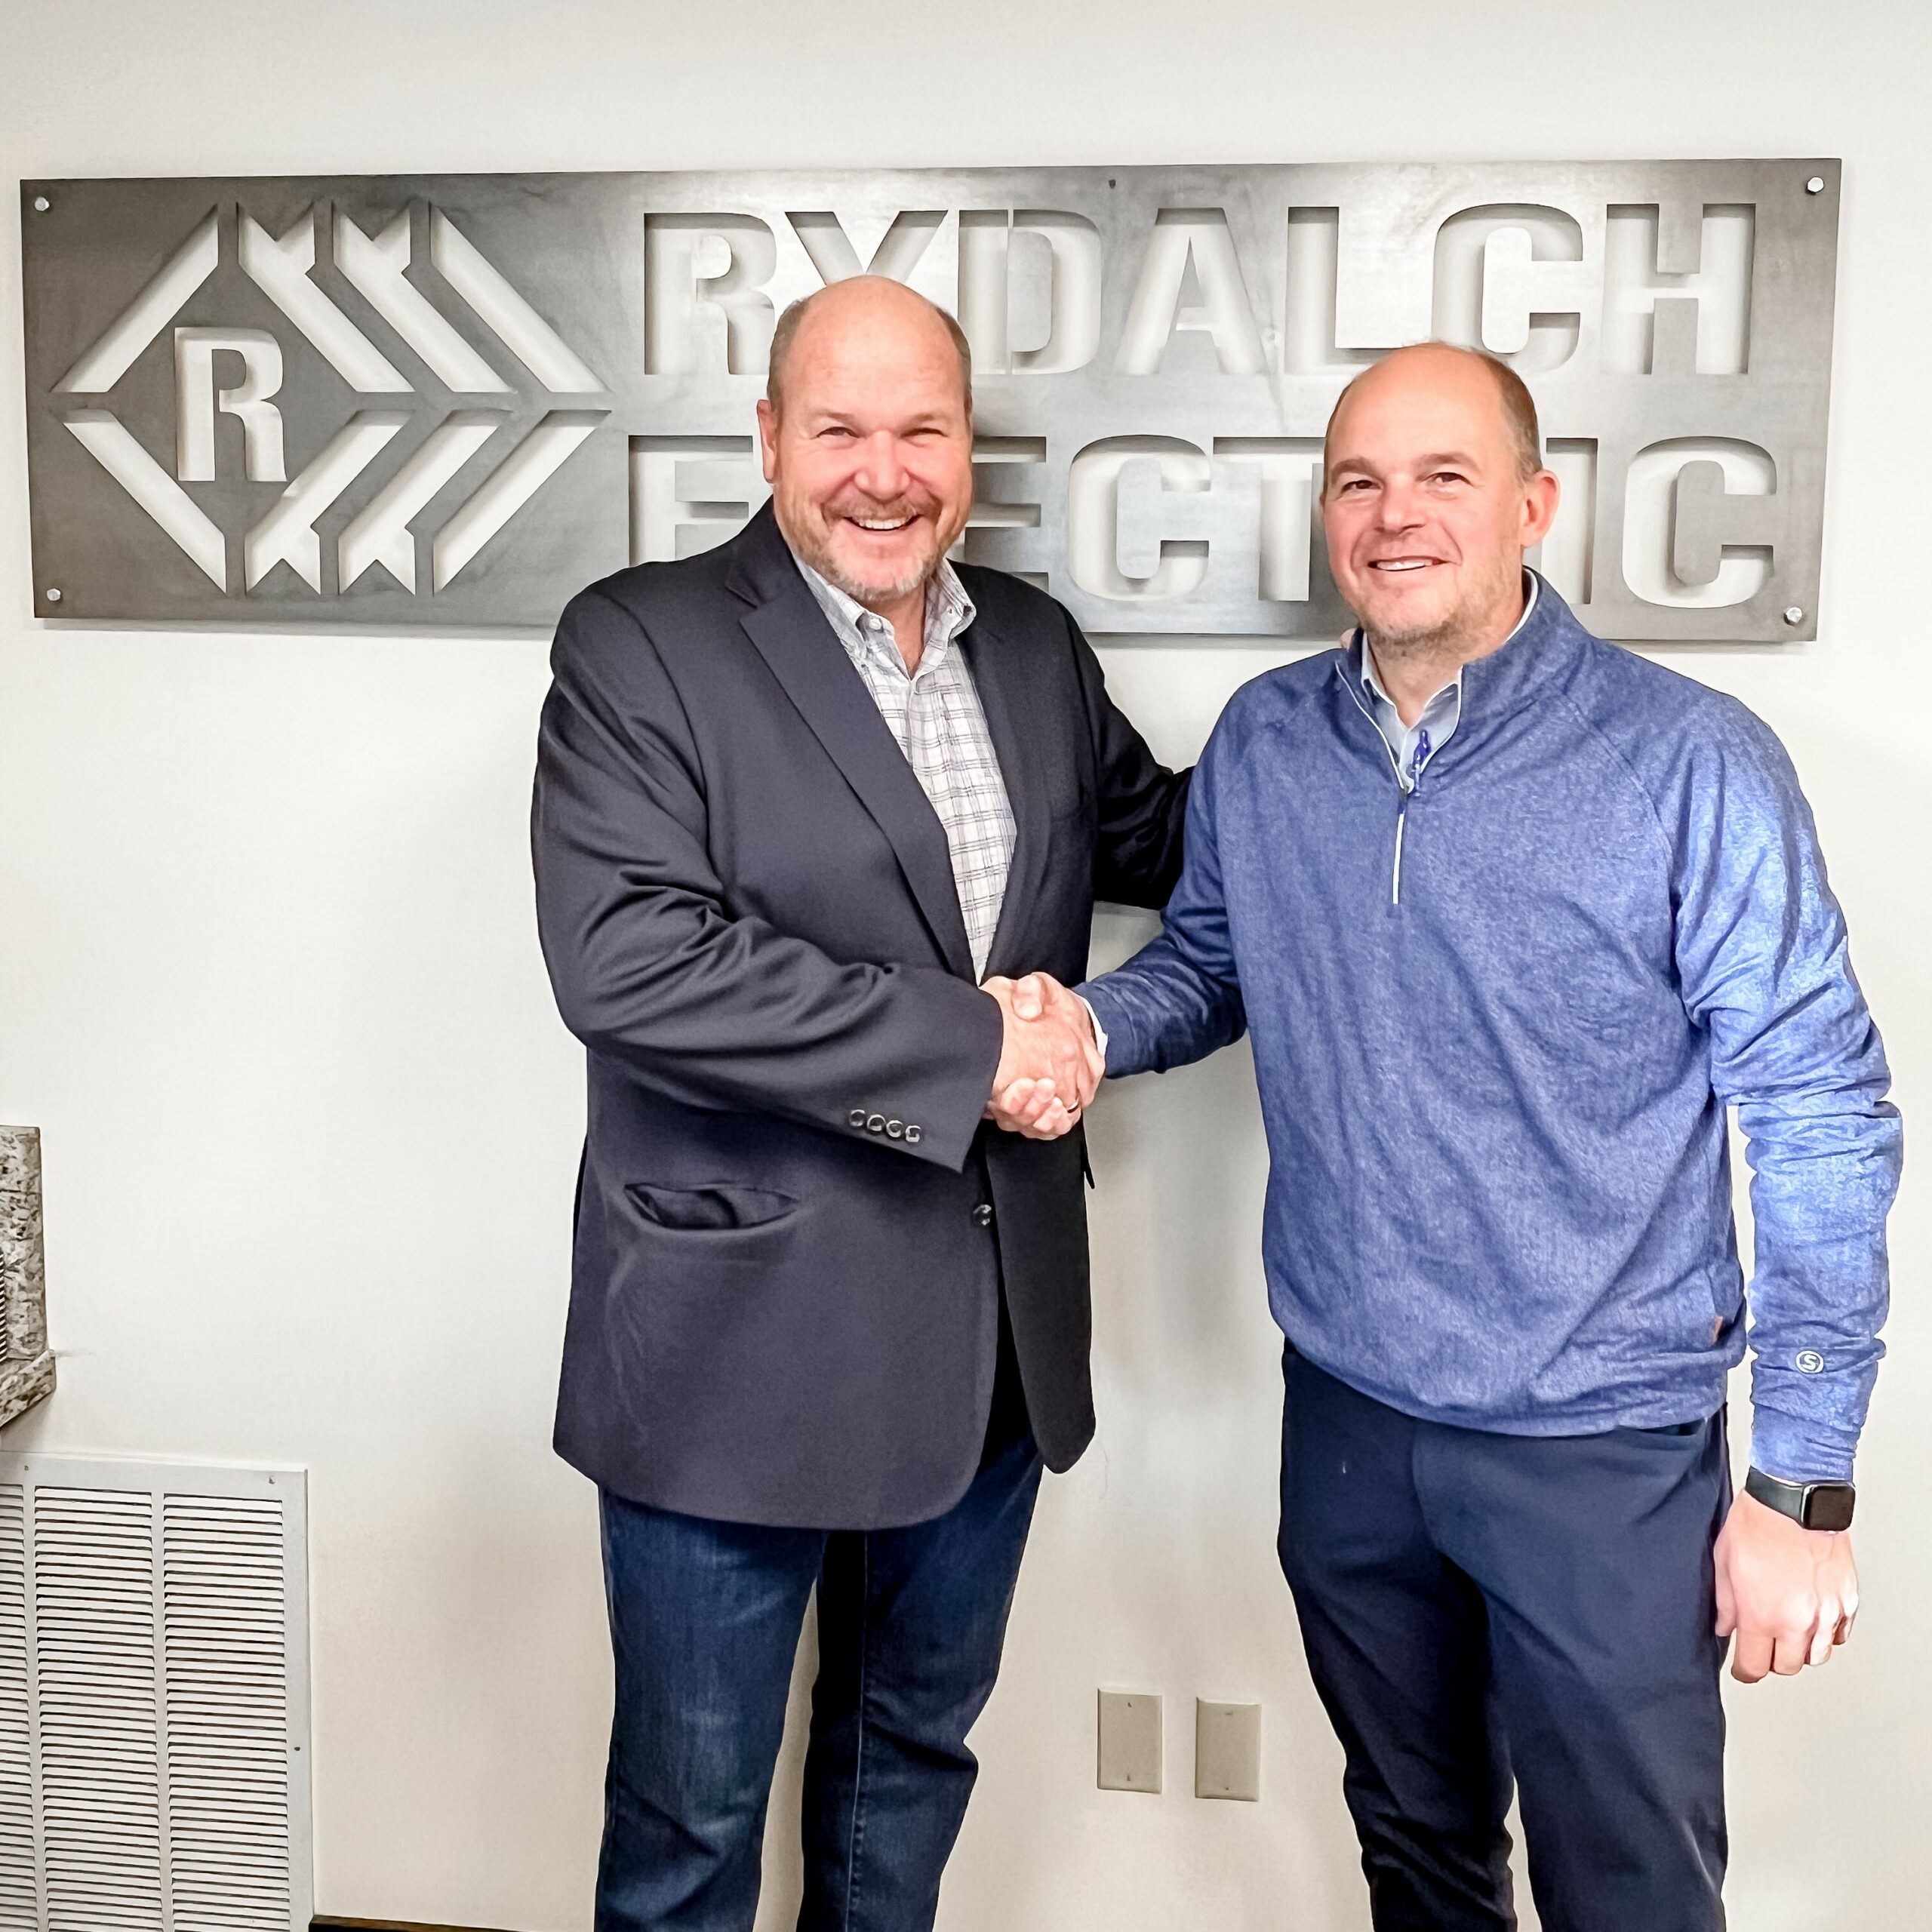 Commonwealth Acquires Rydalch Electric, Inc.